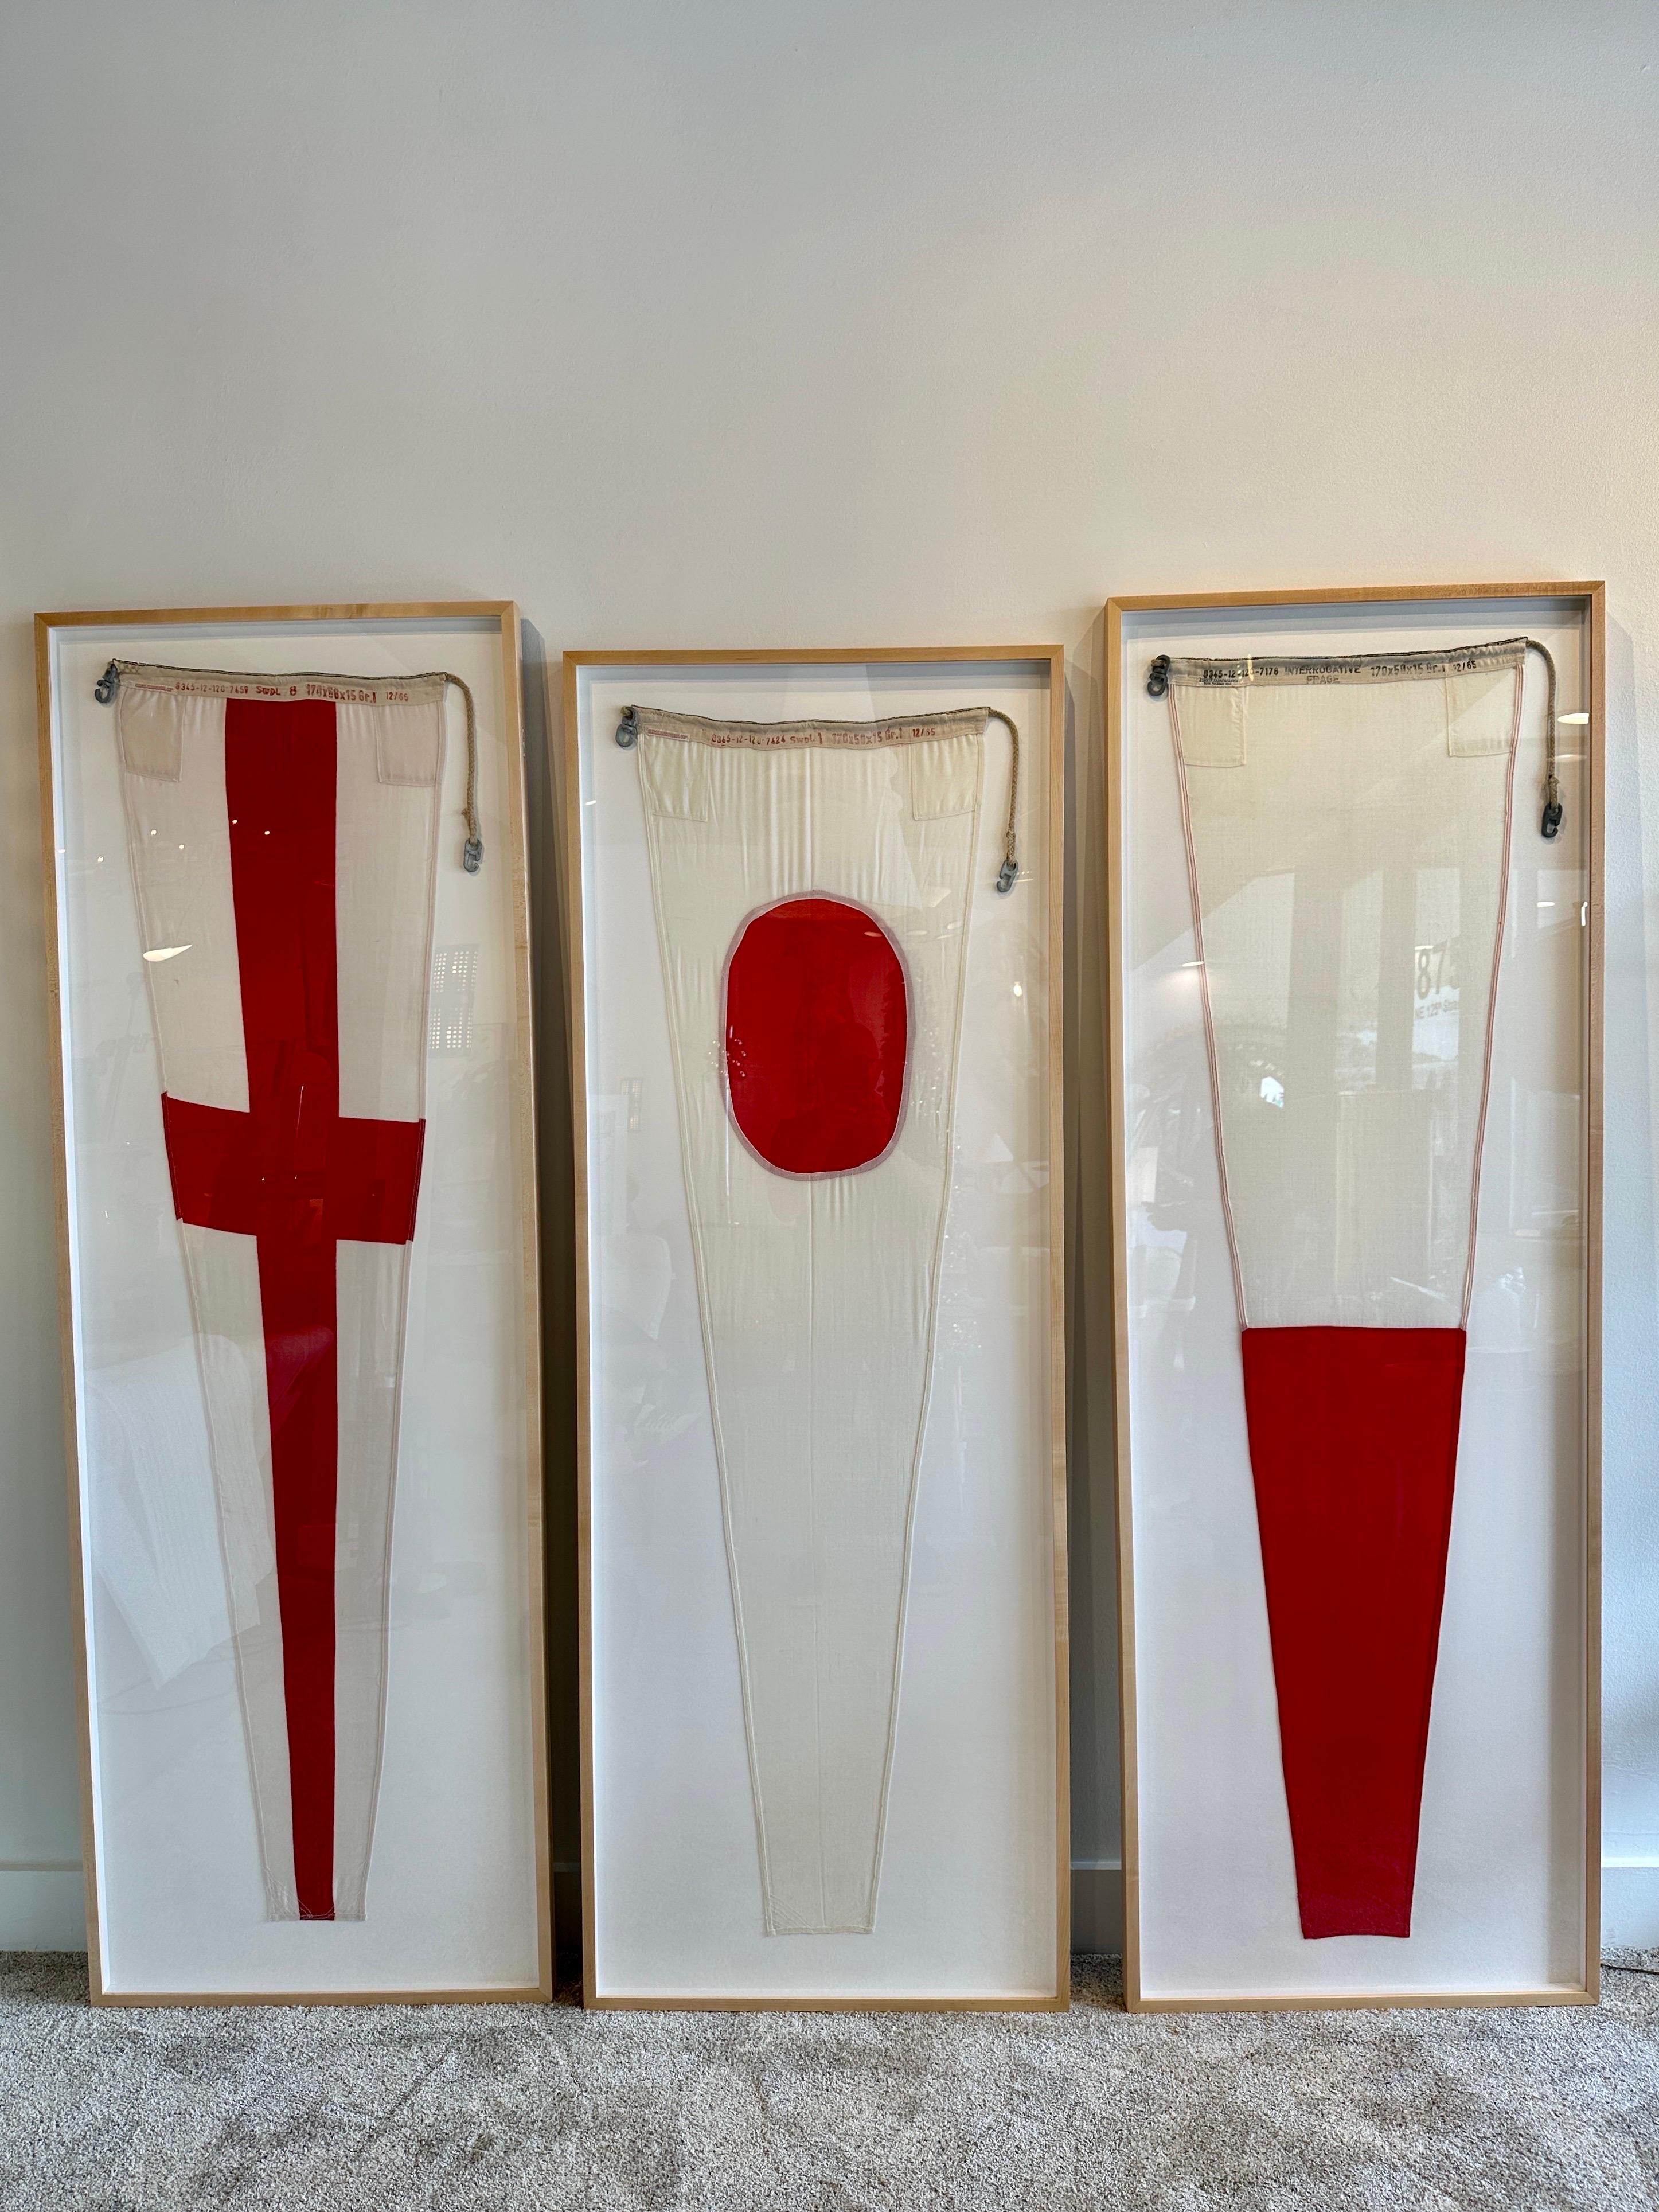 This flag represents the Number eight Signal (Penant 8) - according to the international flags and pennants chart. The flag is the largest scale pennant in vibrant RED and white with hand stitching. Hardware is galvanized steel. This is a large ship